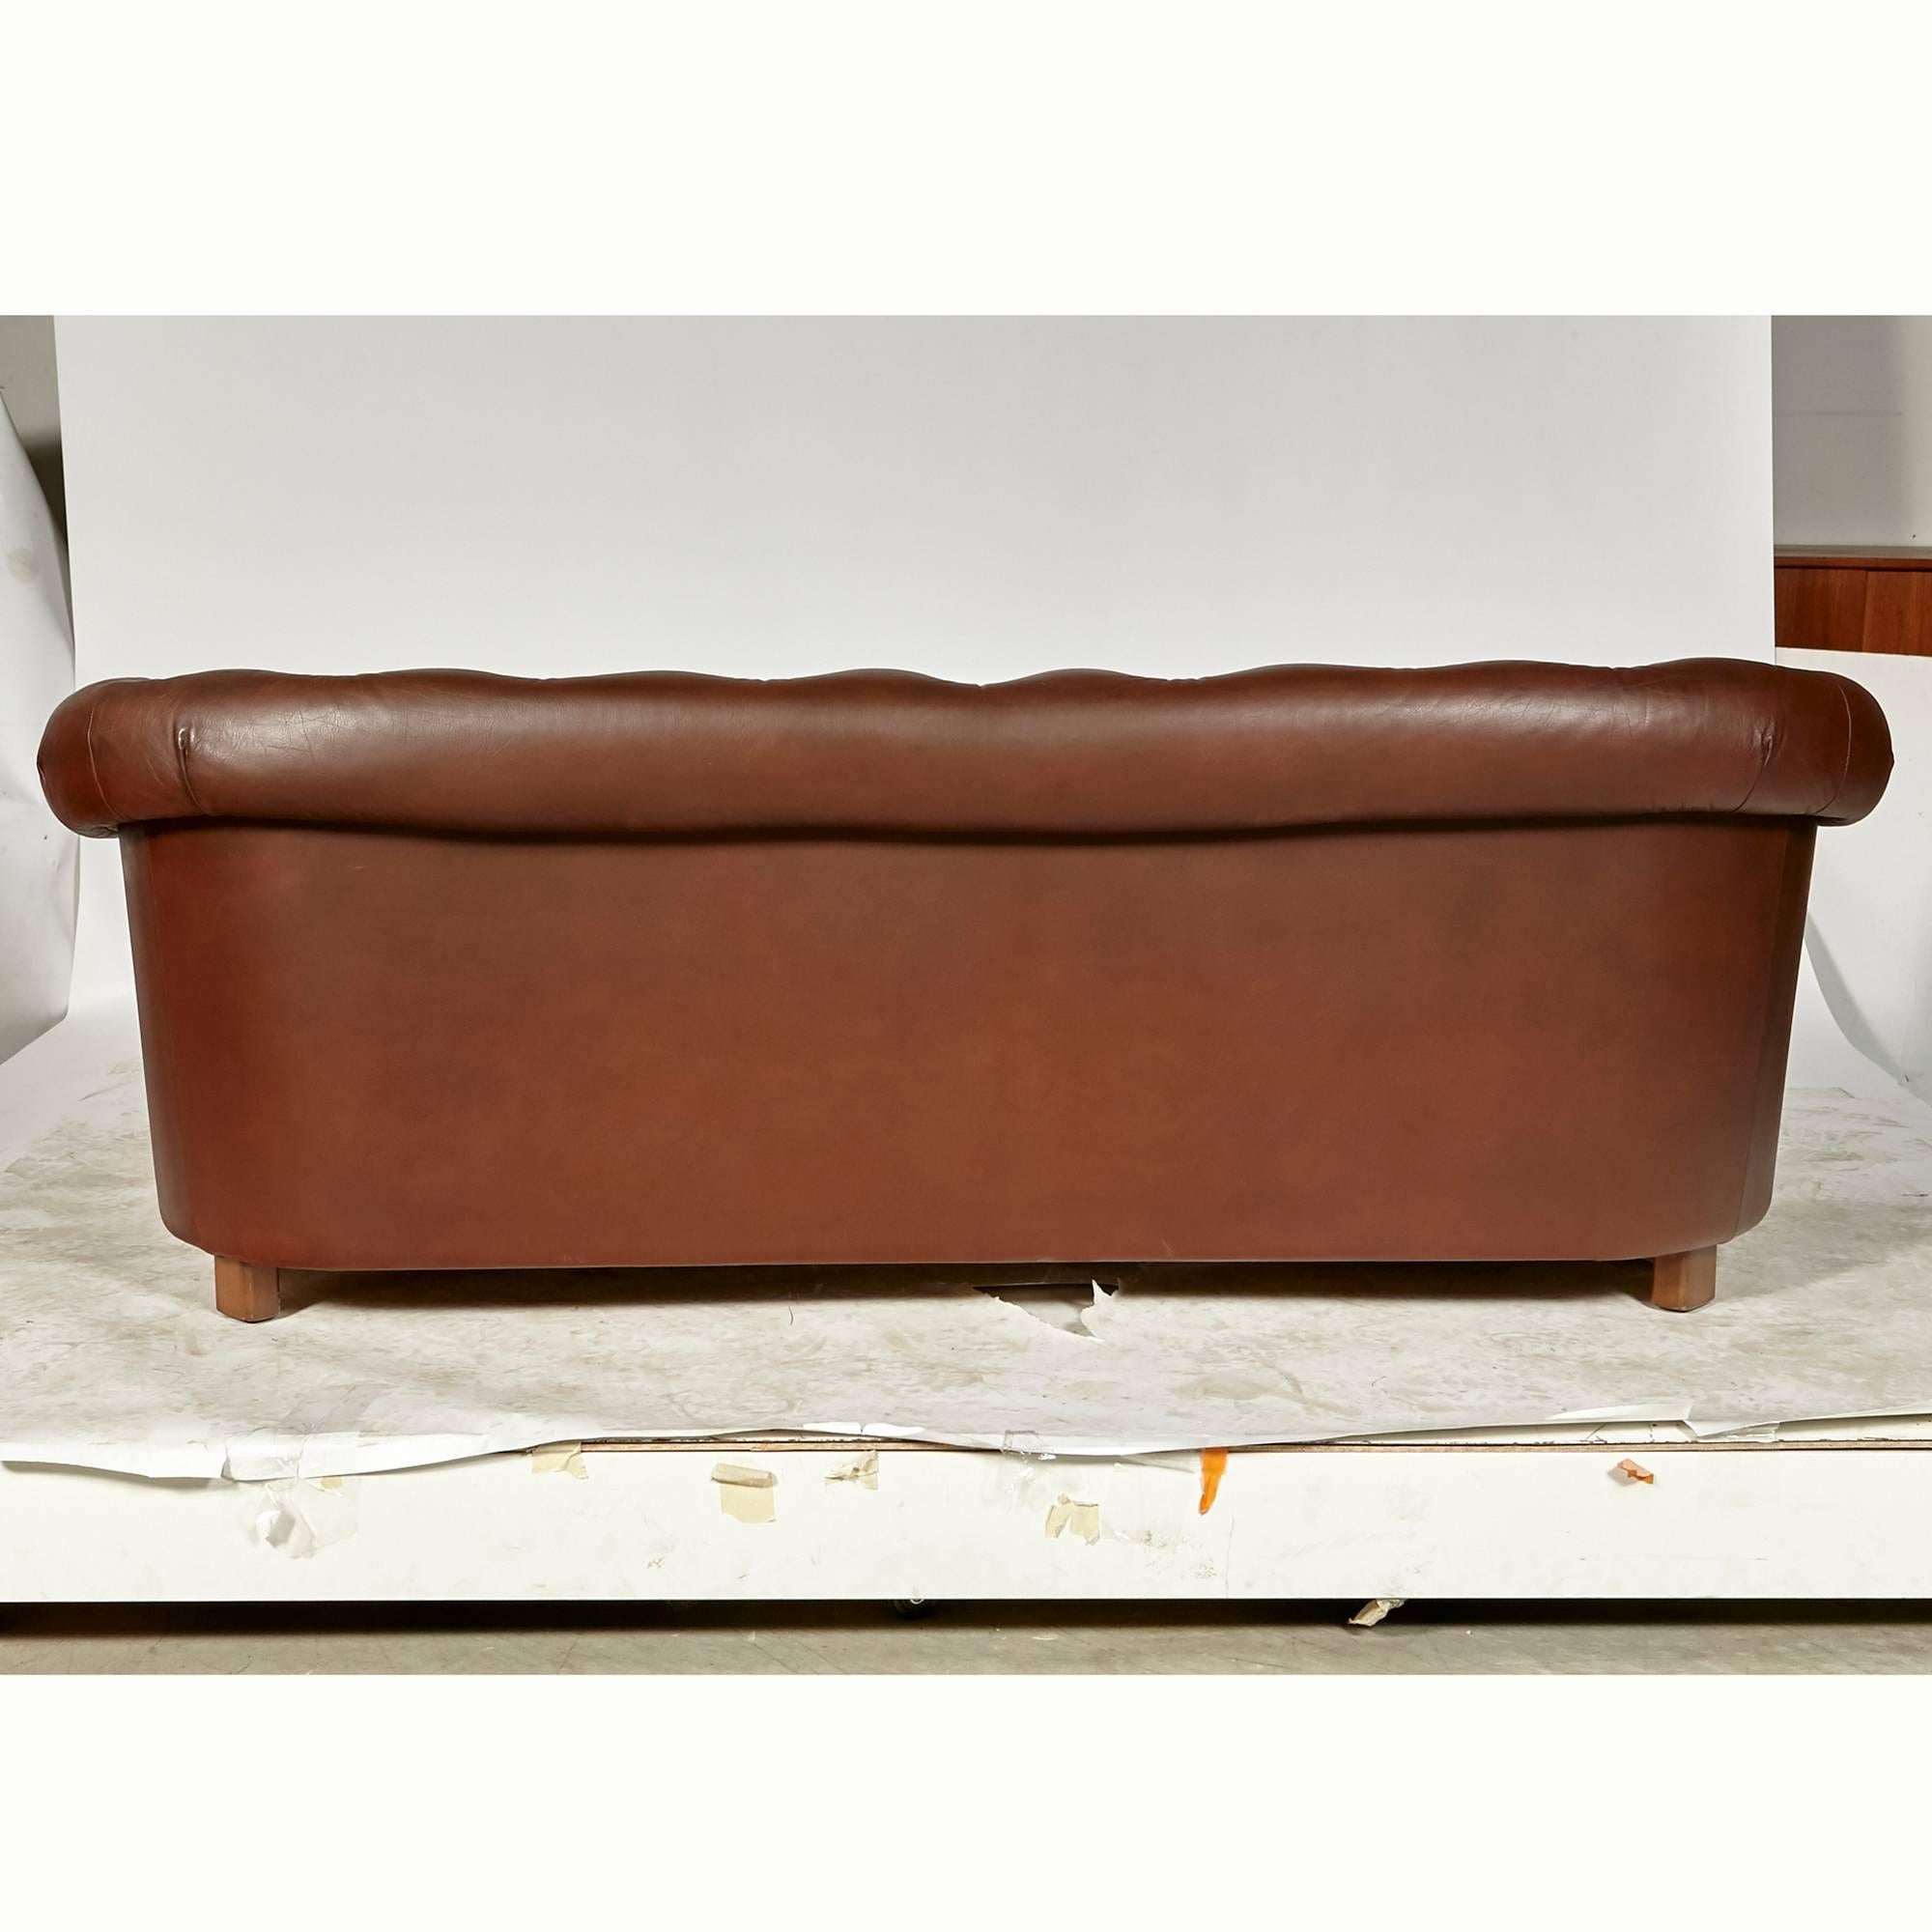 Late 20th Century Brown Leather Chesterfield Sofa For Sale